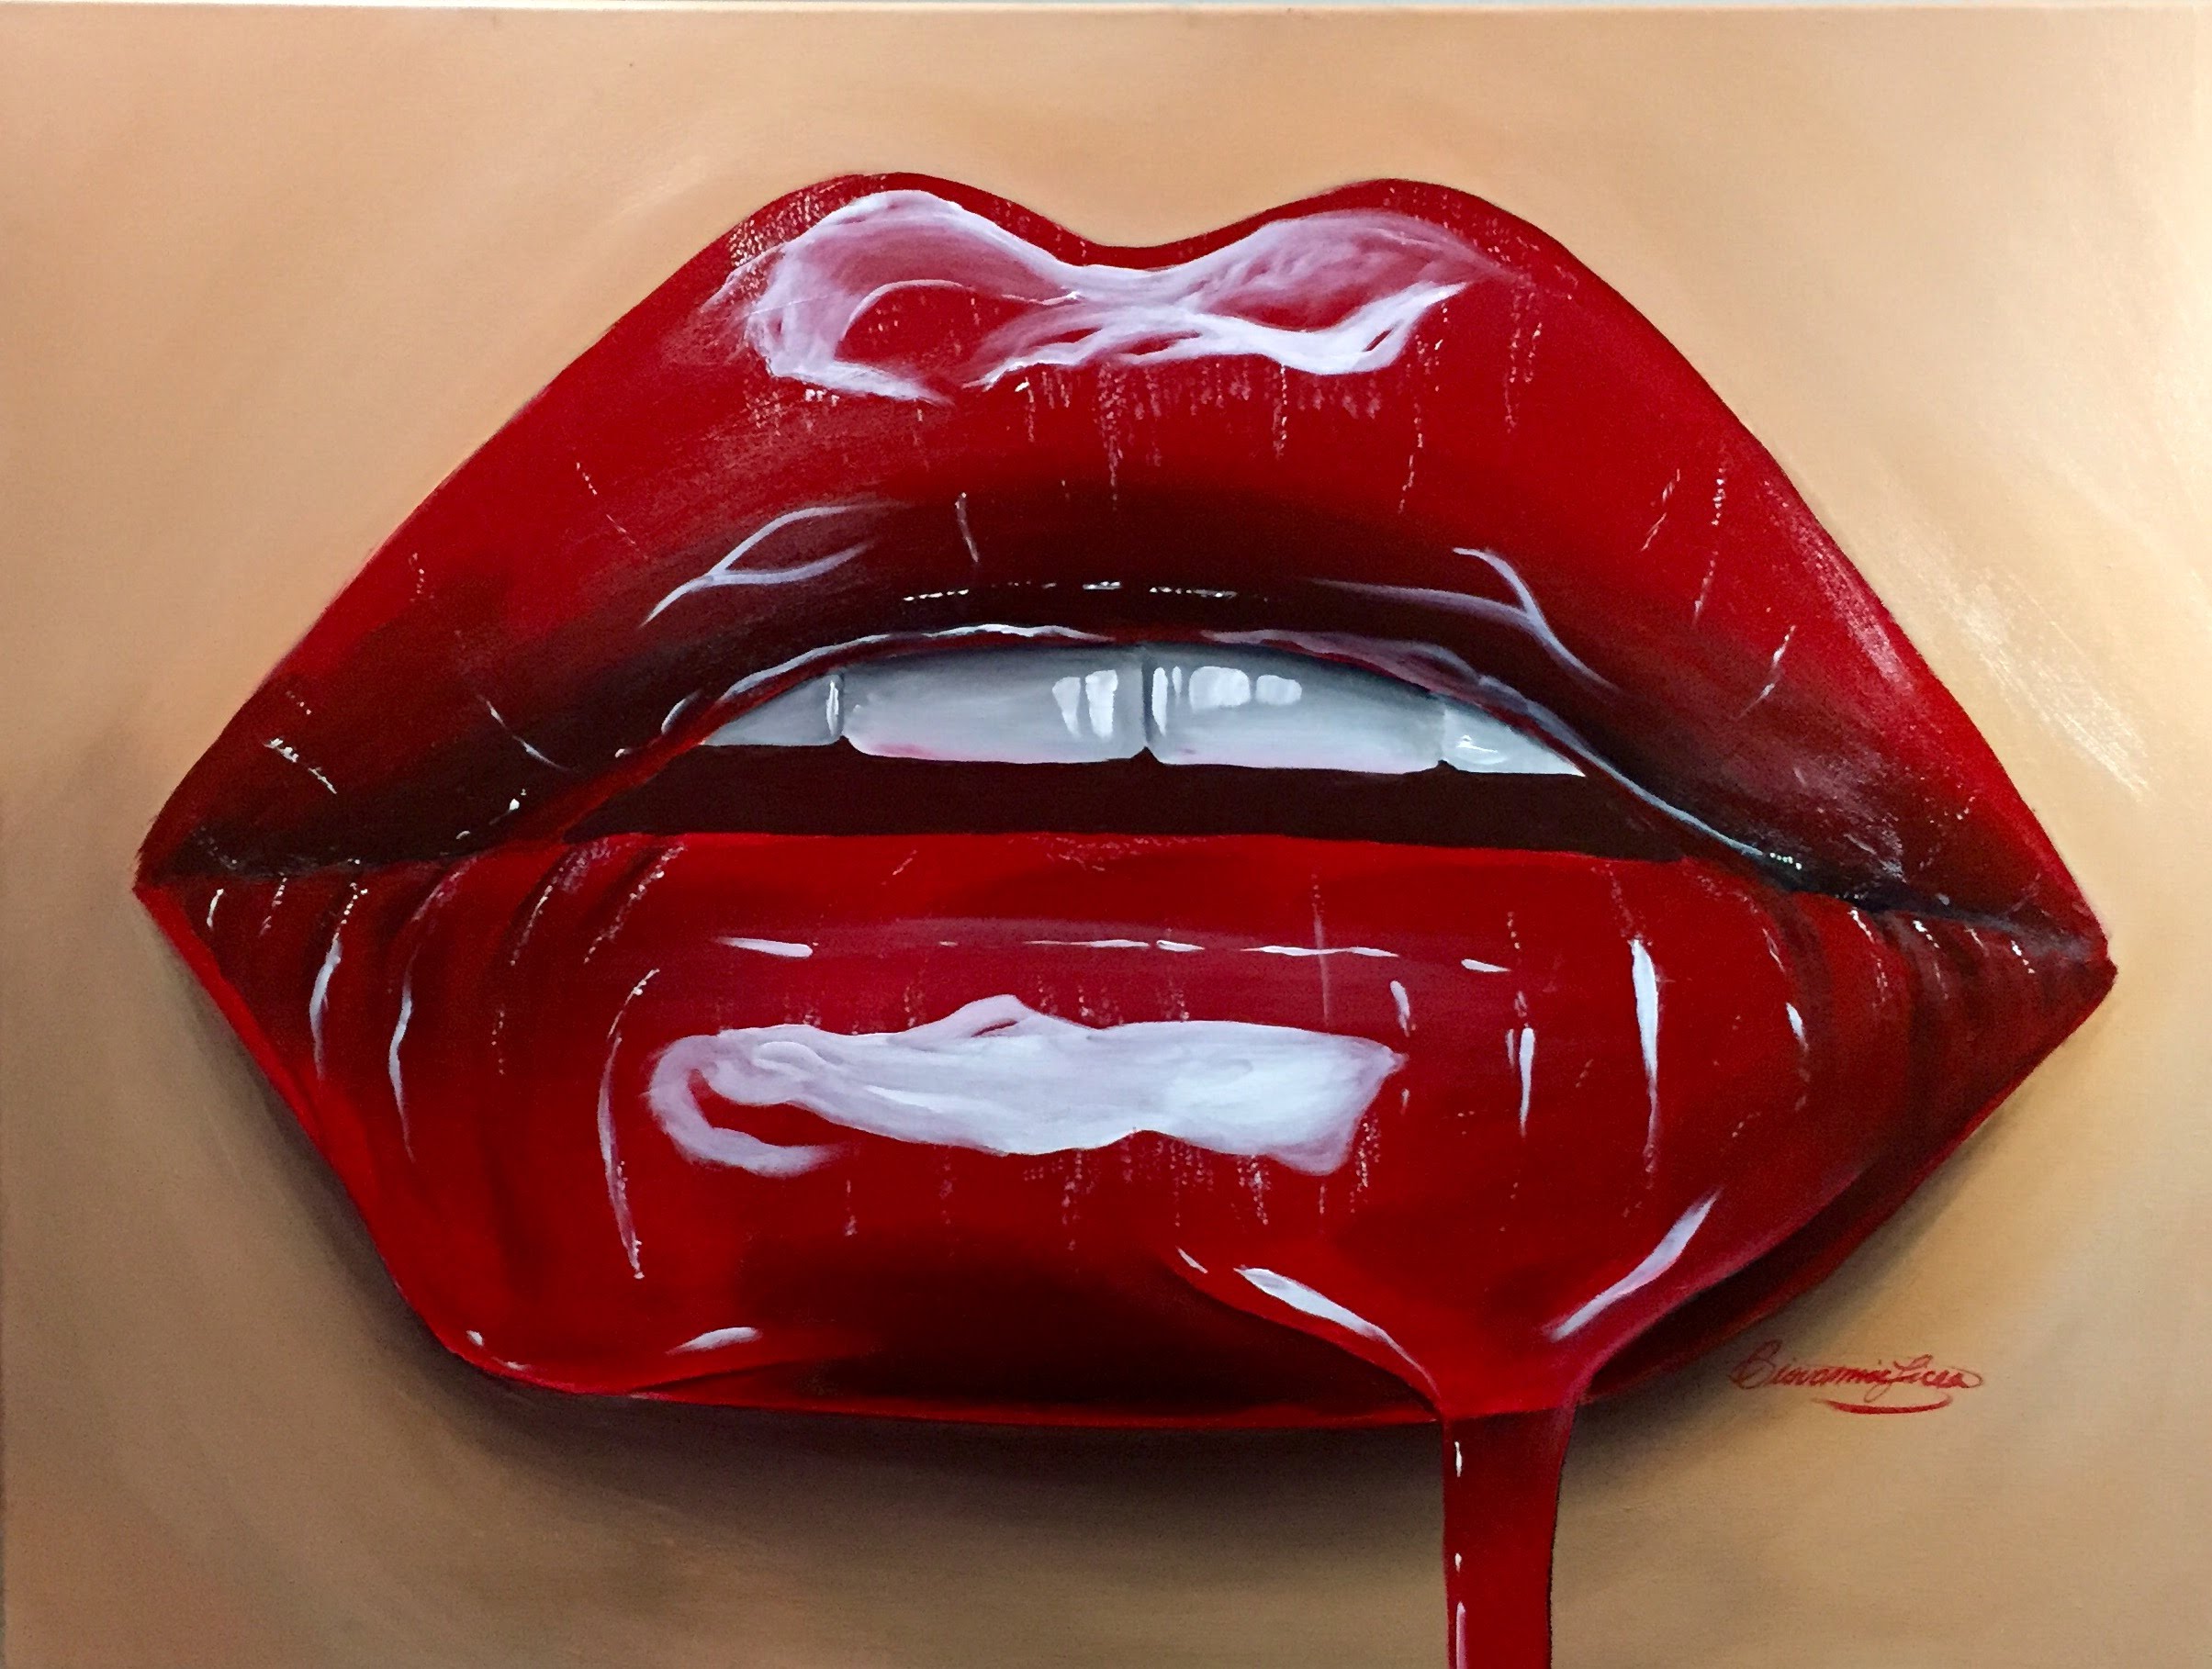 Painting Realistic Cherry Red Lips - Red Lips Sketch. 